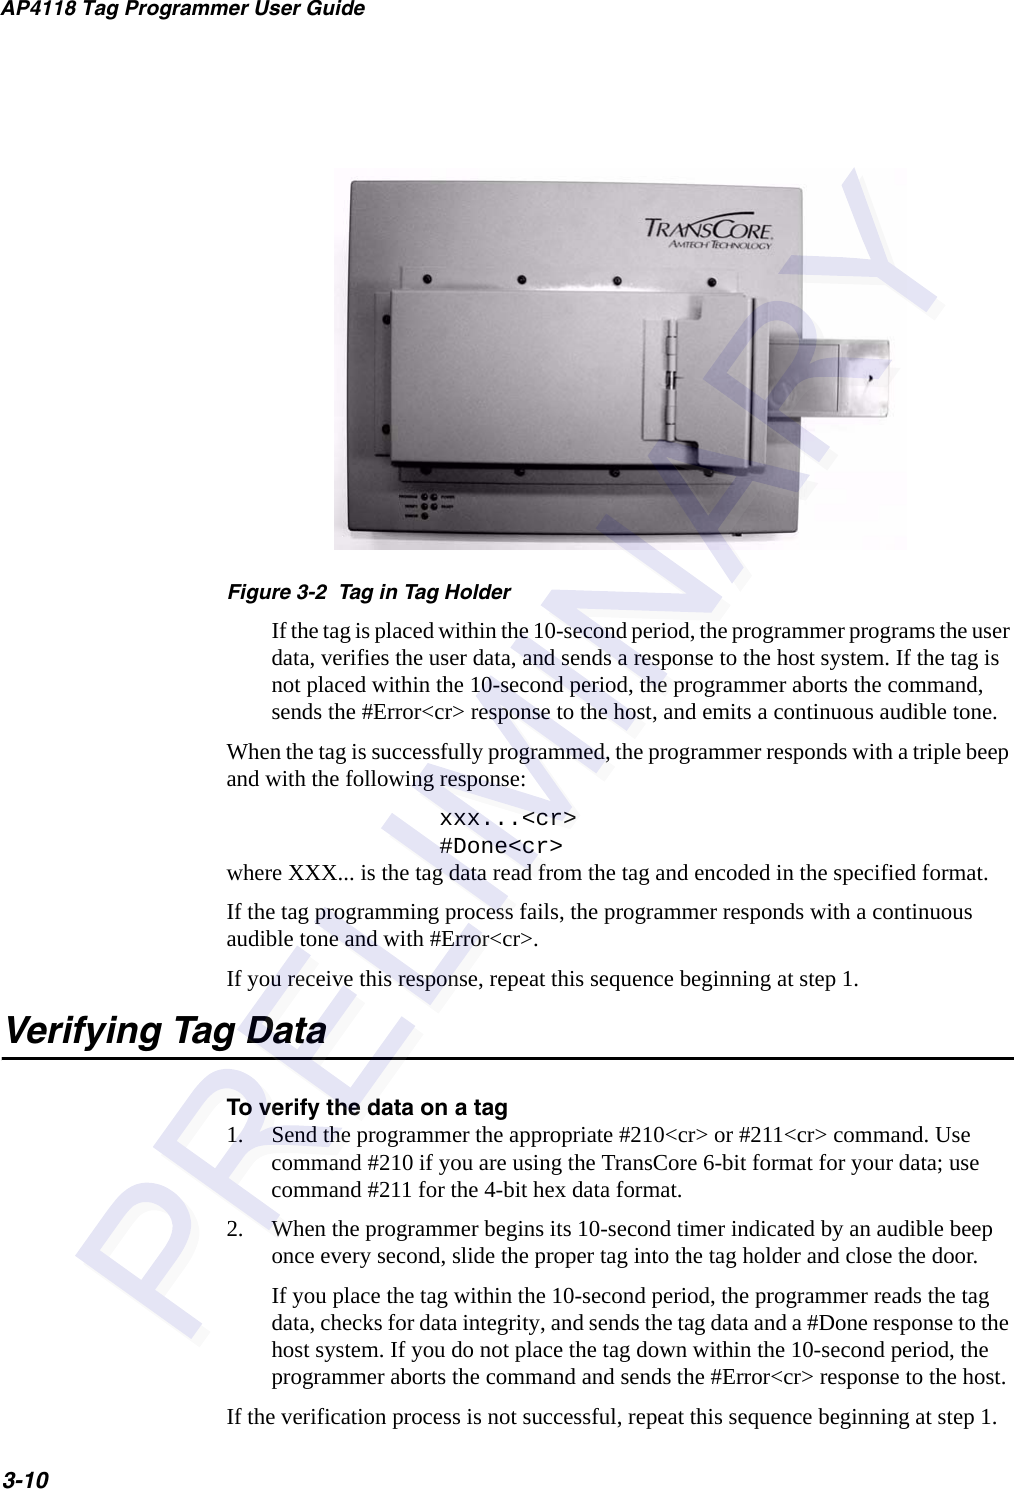 AP4118 Tag Programmer User Guide3-10Figure 3-2  Tag in Tag HolderIf the tag is placed within the 10-second period, the programmer programs the user data, verifies the user data, and sends a response to the host system. If the tag is not placed within the 10-second period, the programmer aborts the command, sends the #Error&lt;cr&gt; response to the host, and emits a continuous audible tone.When the tag is successfully programmed, the programmer responds with a triple beep and with the following response:xxx...&lt;cr&gt; #Done&lt;cr&gt; where XXX... is the tag data read from the tag and encoded in the specified format.If the tag programming process fails, the programmer responds with a continuous audible tone and with #Error&lt;cr&gt;.If you receive this response, repeat this sequence beginning at step 1.Verifying Tag DataTo verify the data on a tag1. Send the programmer the appropriate #210&lt;cr&gt; or #211&lt;cr&gt; command. Use command #210 if you are using the TransCore 6-bit format for your data; use command #211 for the 4-bit hex data format.2. When the programmer begins its 10-second timer indicated by an audible beep once every second, slide the proper tag into the tag holder and close the door.If you place the tag within the 10-second period, the programmer reads the tag data, checks for data integrity, and sends the tag data and a #Done response to the host system. If you do not place the tag down within the 10-second period, the programmer aborts the command and sends the #Error&lt;cr&gt; response to the host.If the verification process is not successful, repeat this sequence beginning at step 1.